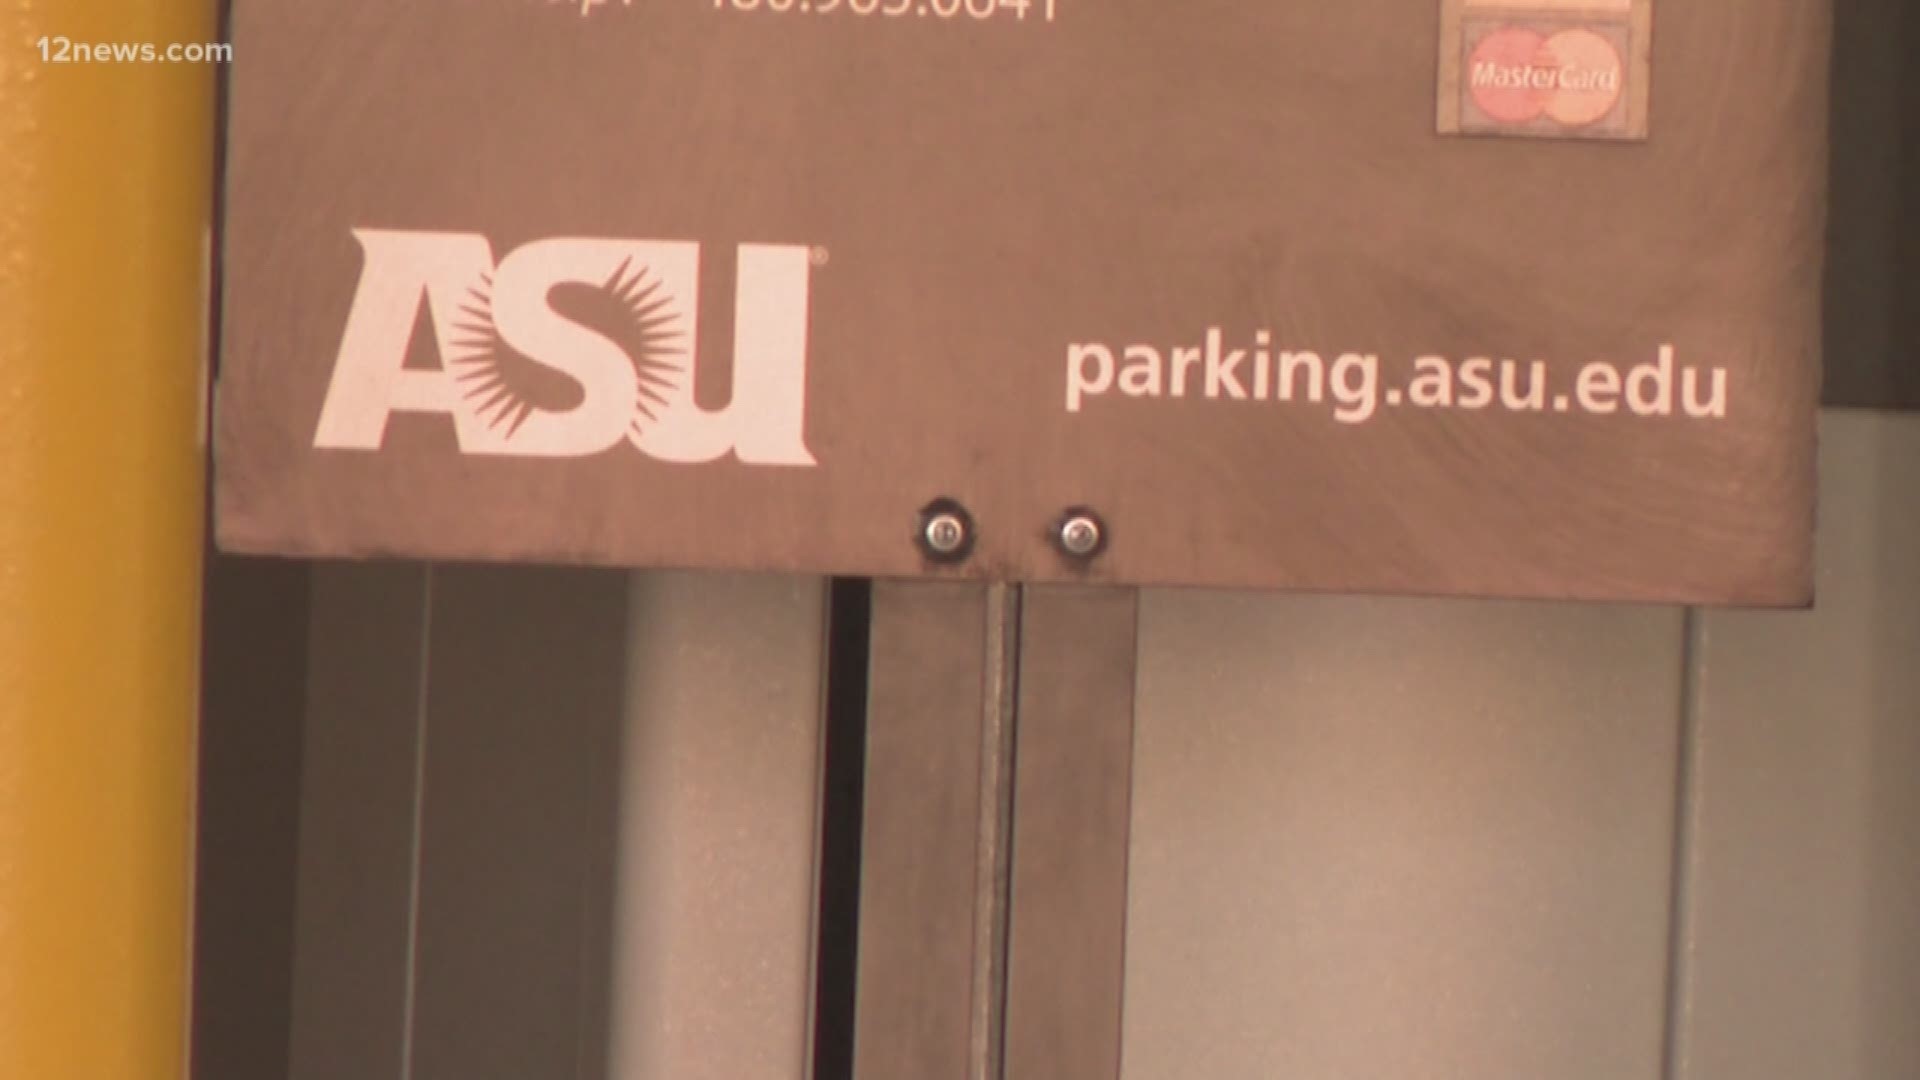 Two incidents of groping occurred on ASU's campus Friday as thousands of students moved into their dorms. Police say the suspect is between 30 and 40 years old, has long brown hair with buzzed sides and a bald spot on top. He was wearing a gray or green button-up shirt.